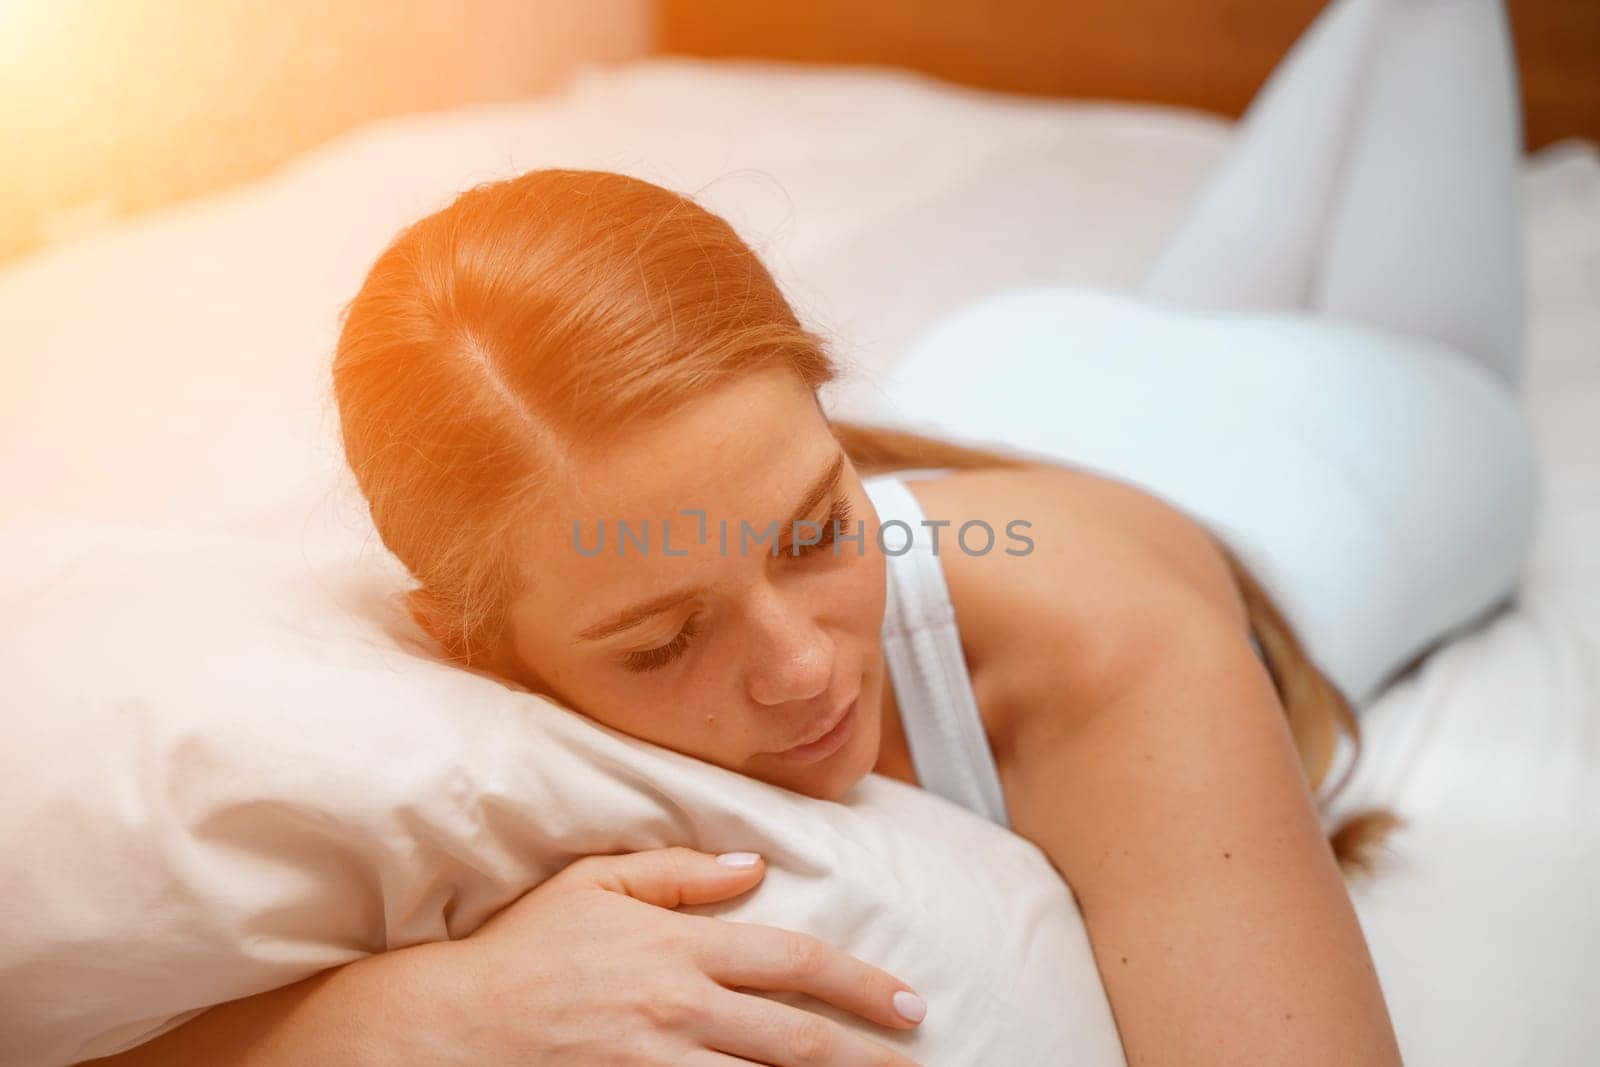 A young woman lies on a bed without a blanket. Bed linen is white